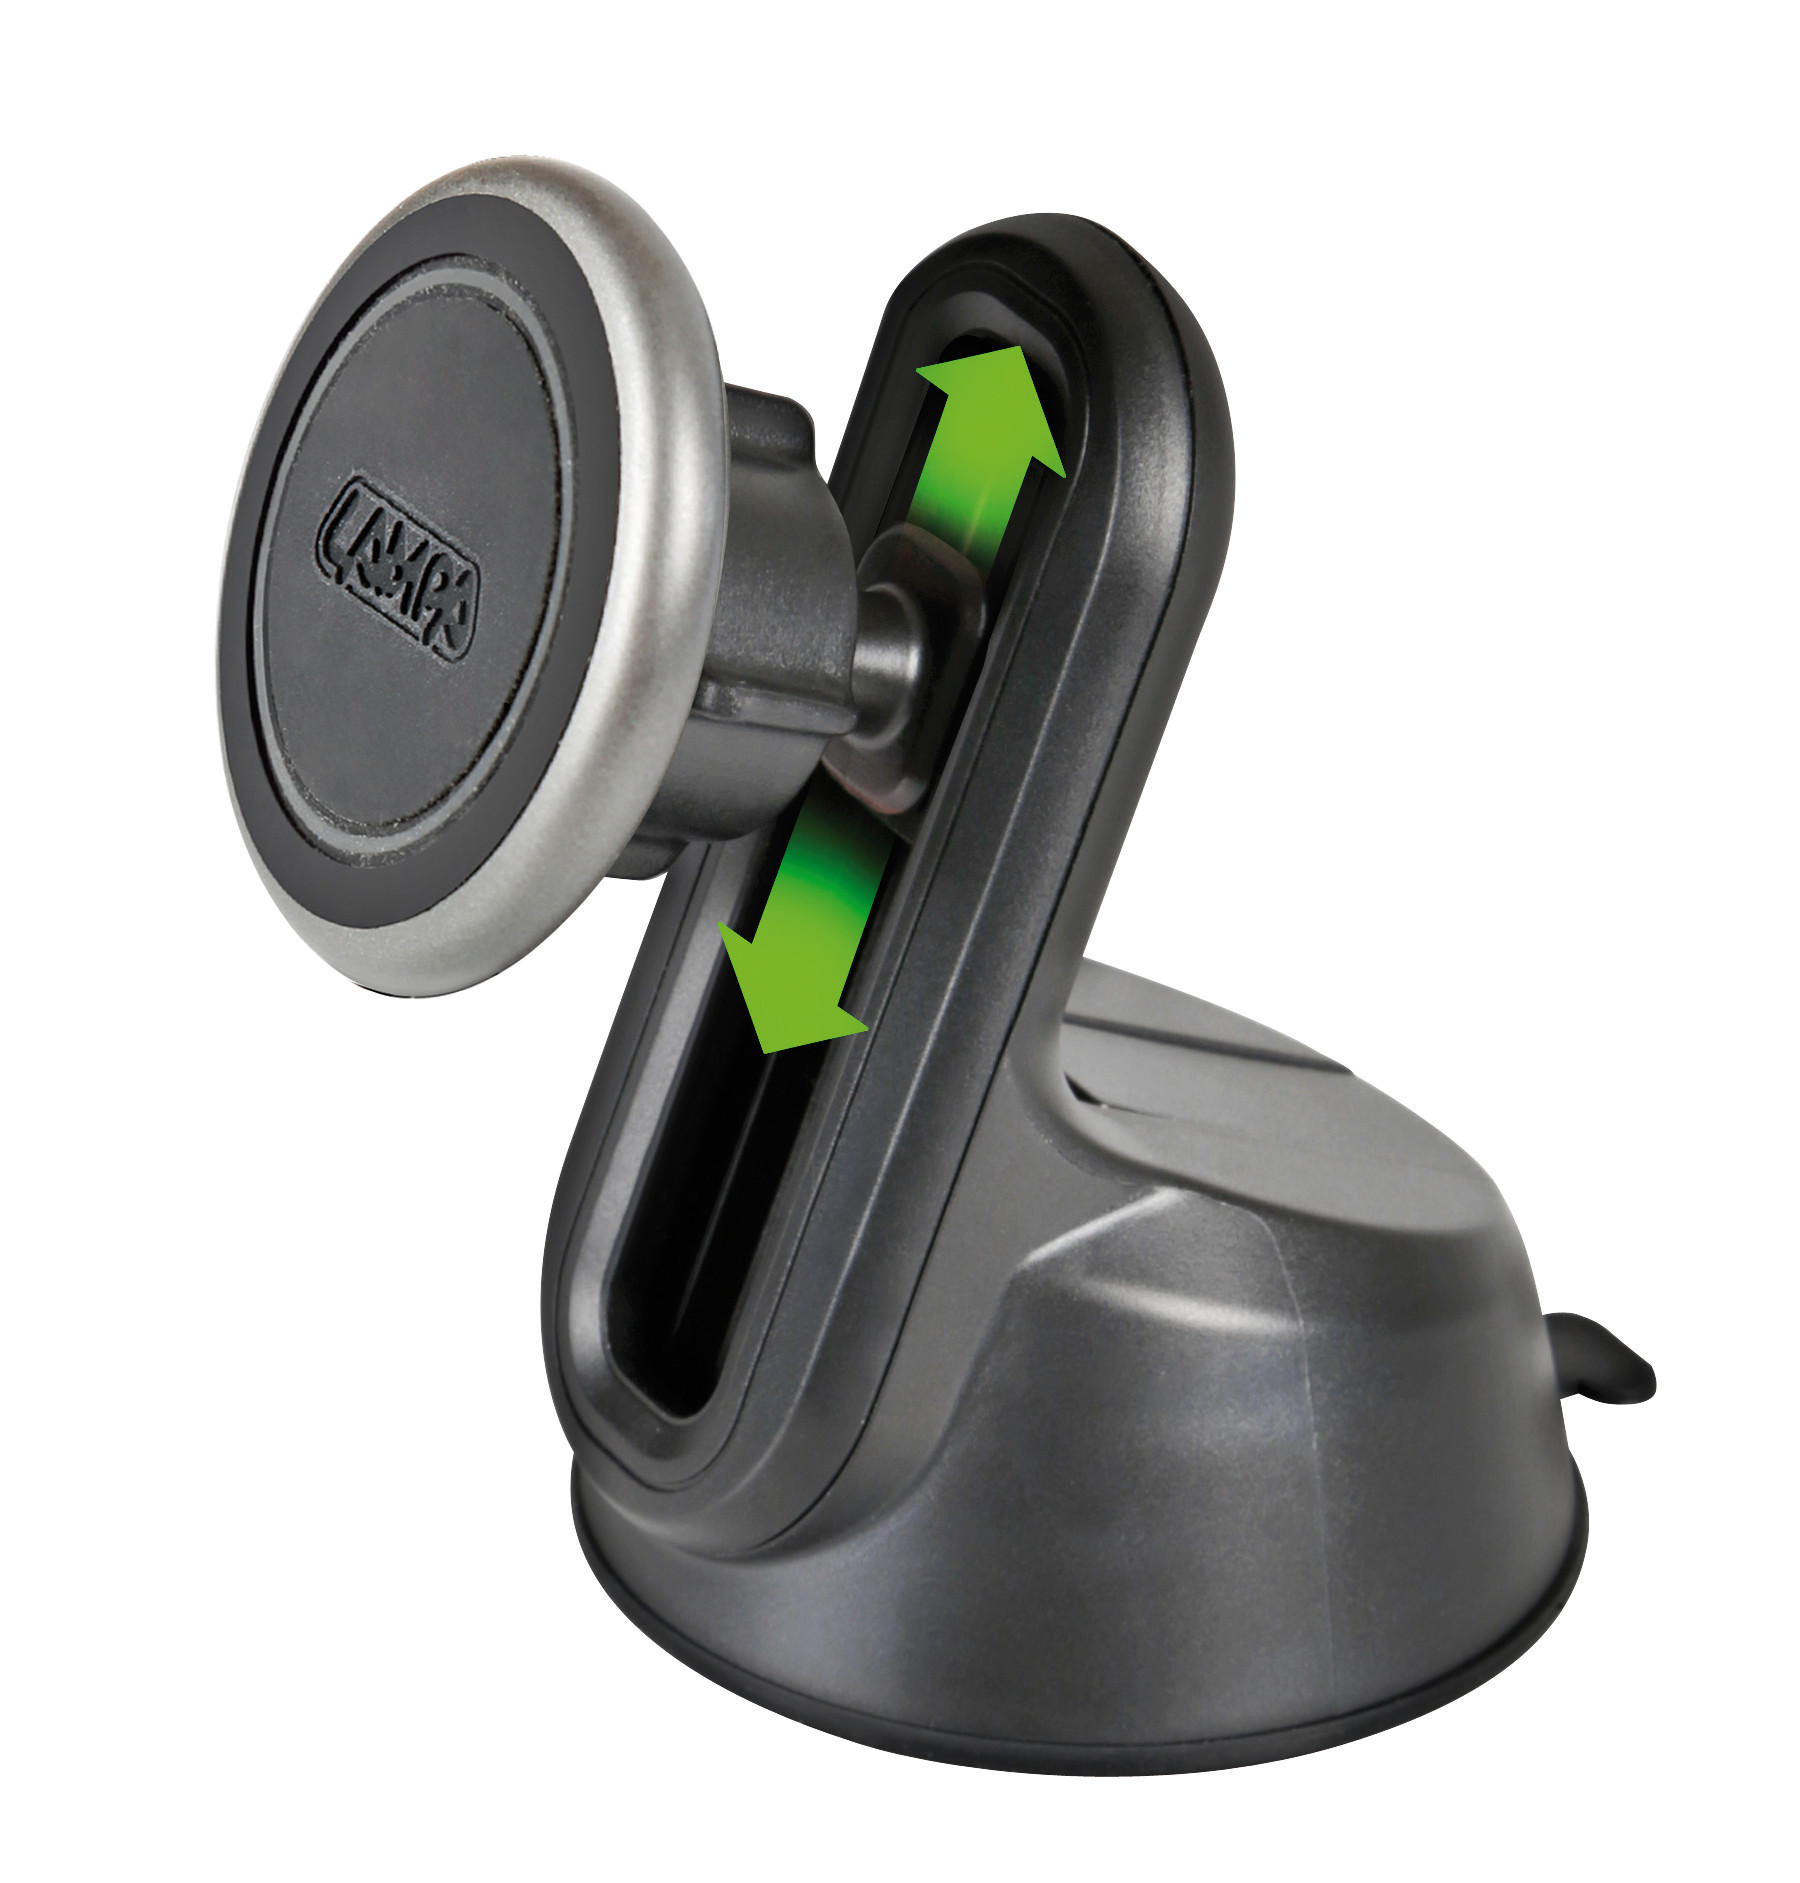 Magneto Elevator, magnetic phone holder with sticky suction cup thumb